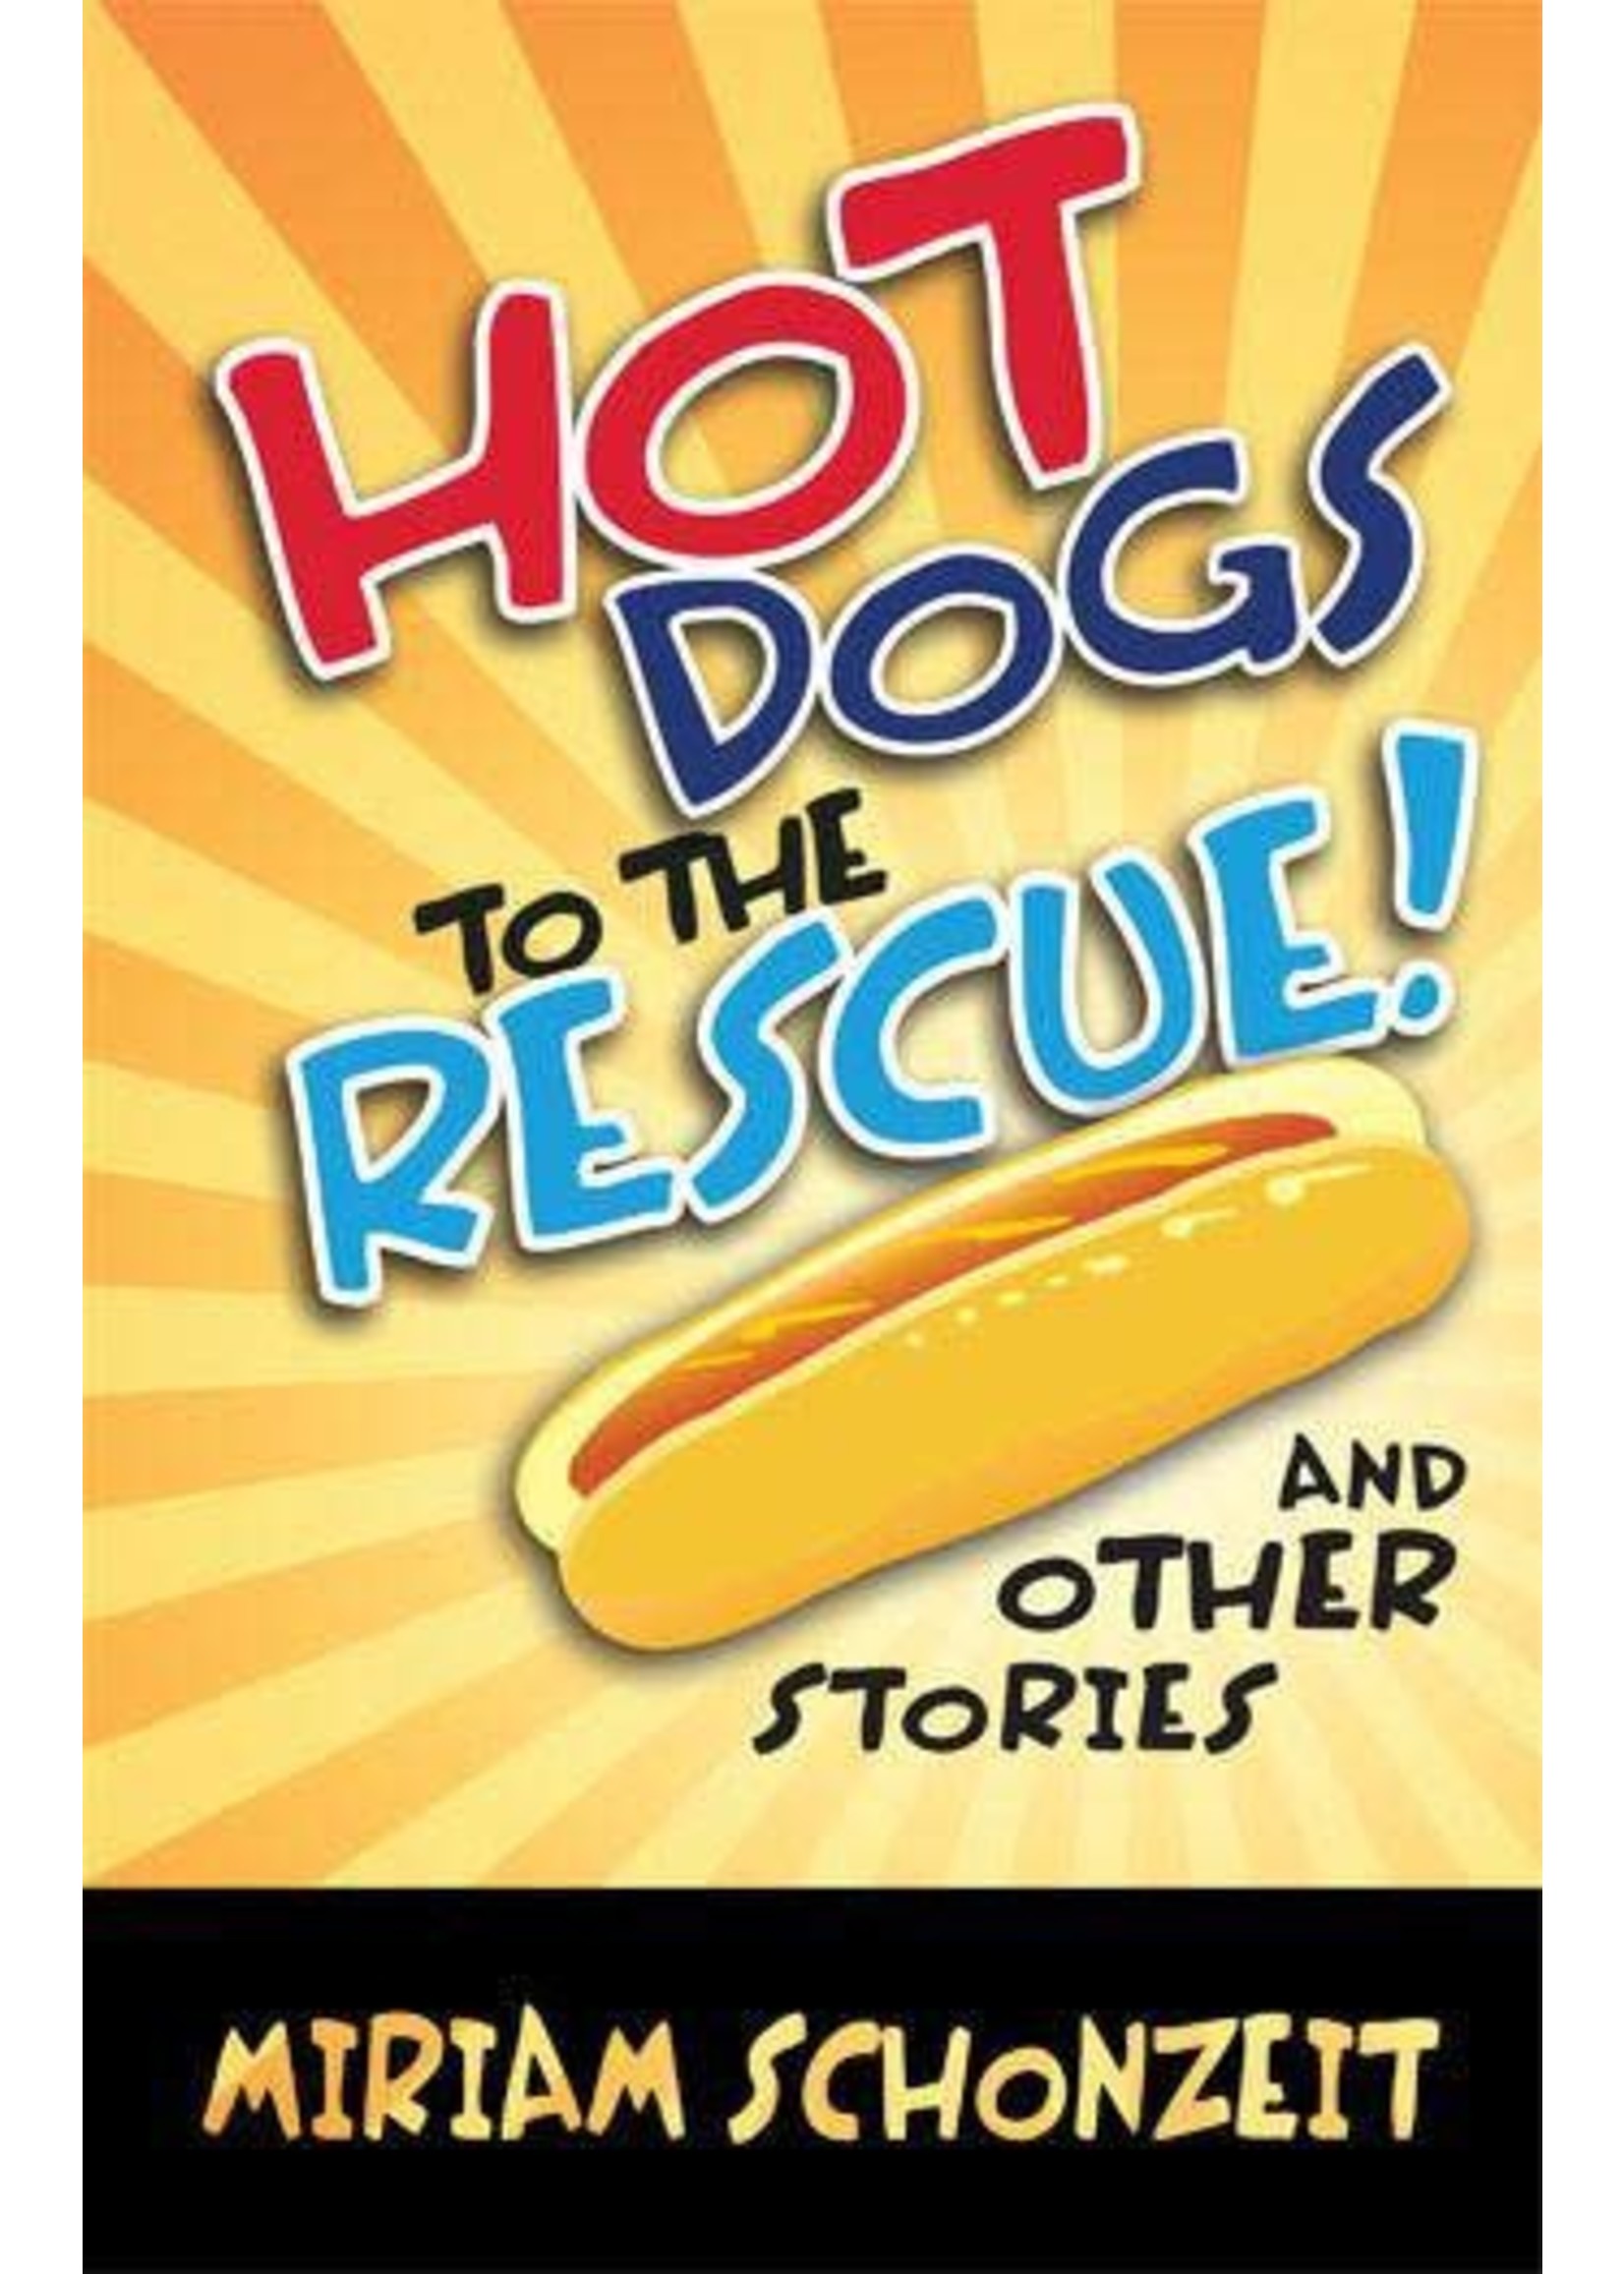 Hot Dogs to the Rescue and other stories